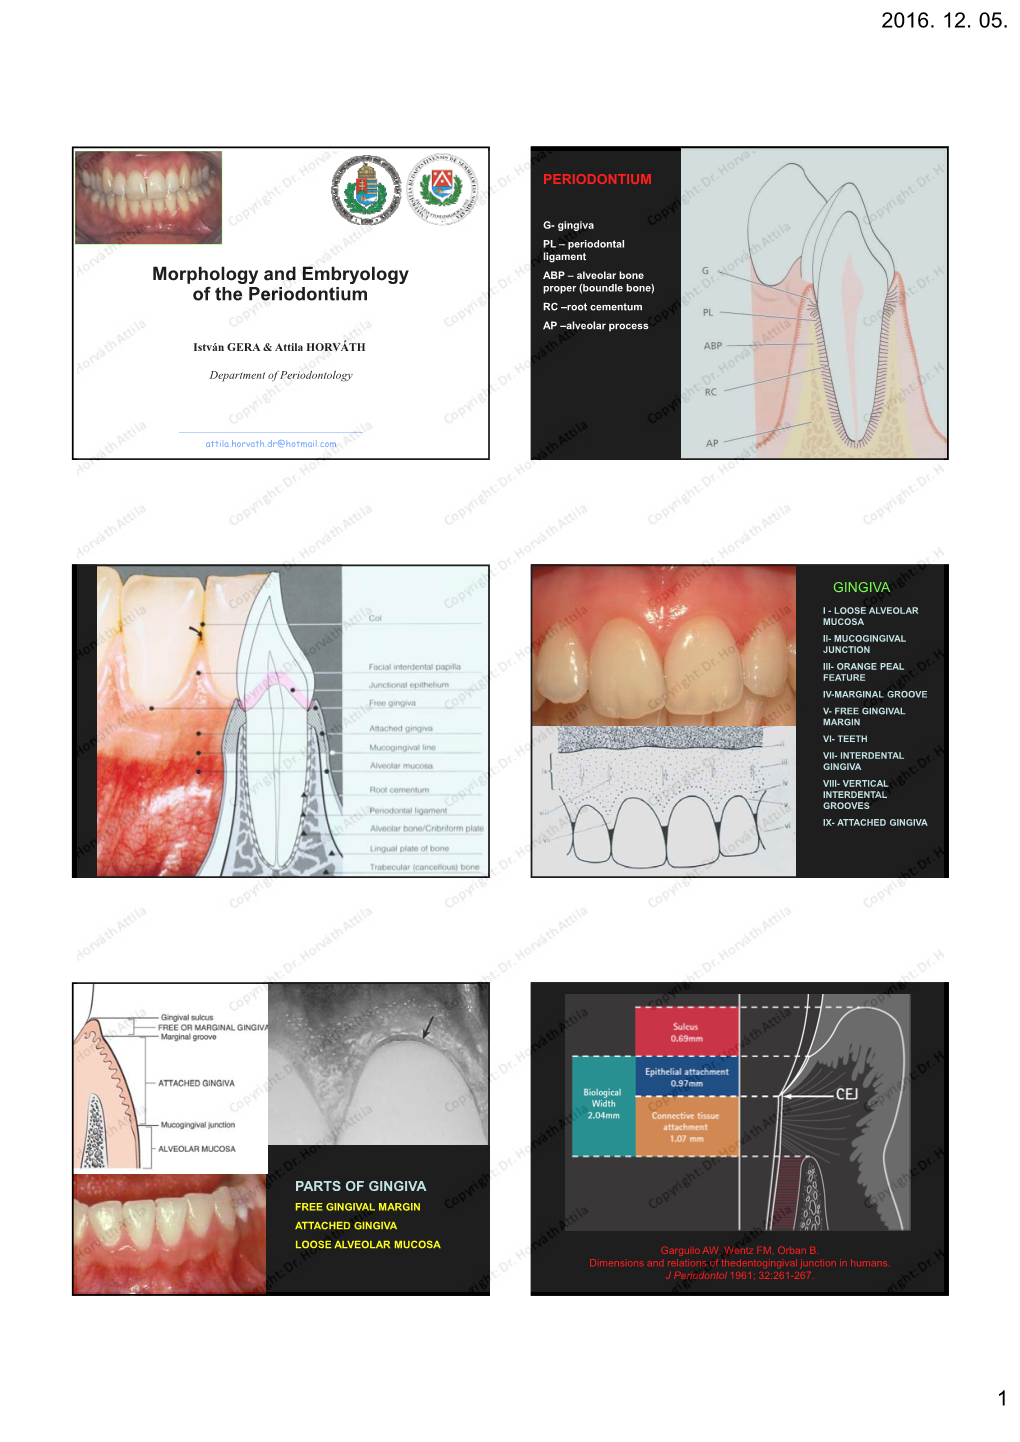 Morphology and Embryology of the Periodontium